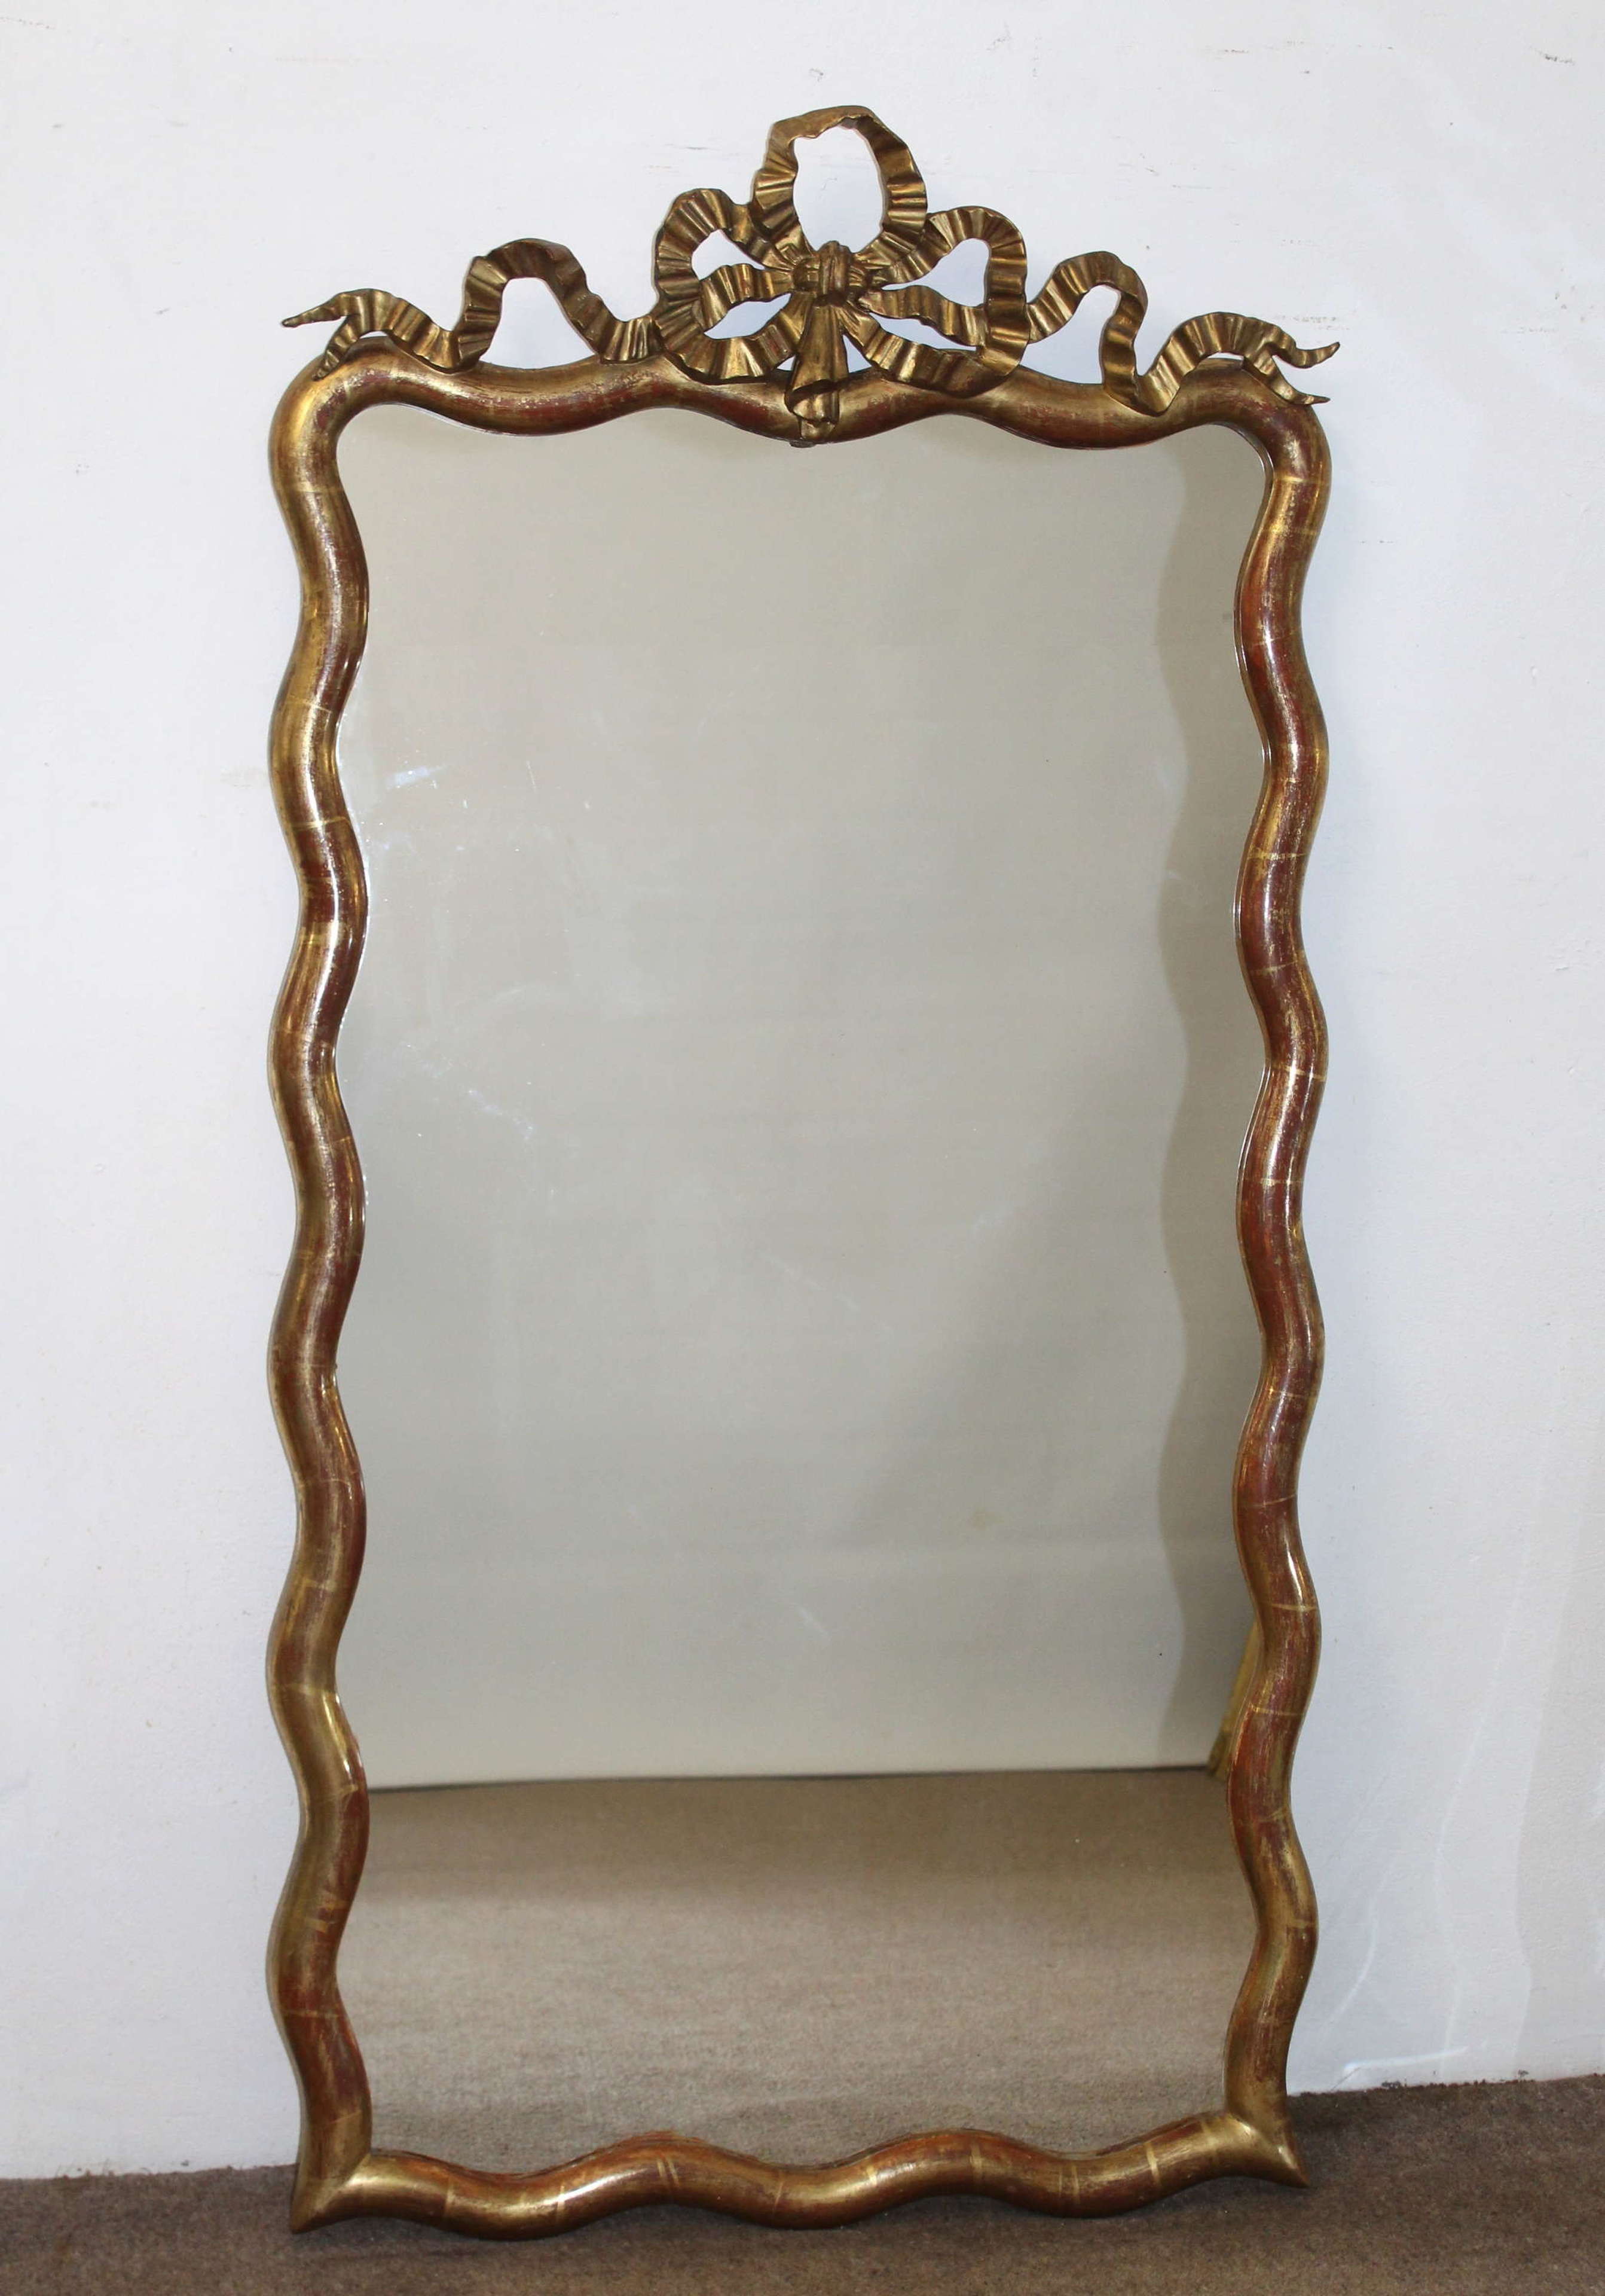 Antique French mirror with wavy frame and bow cartouche